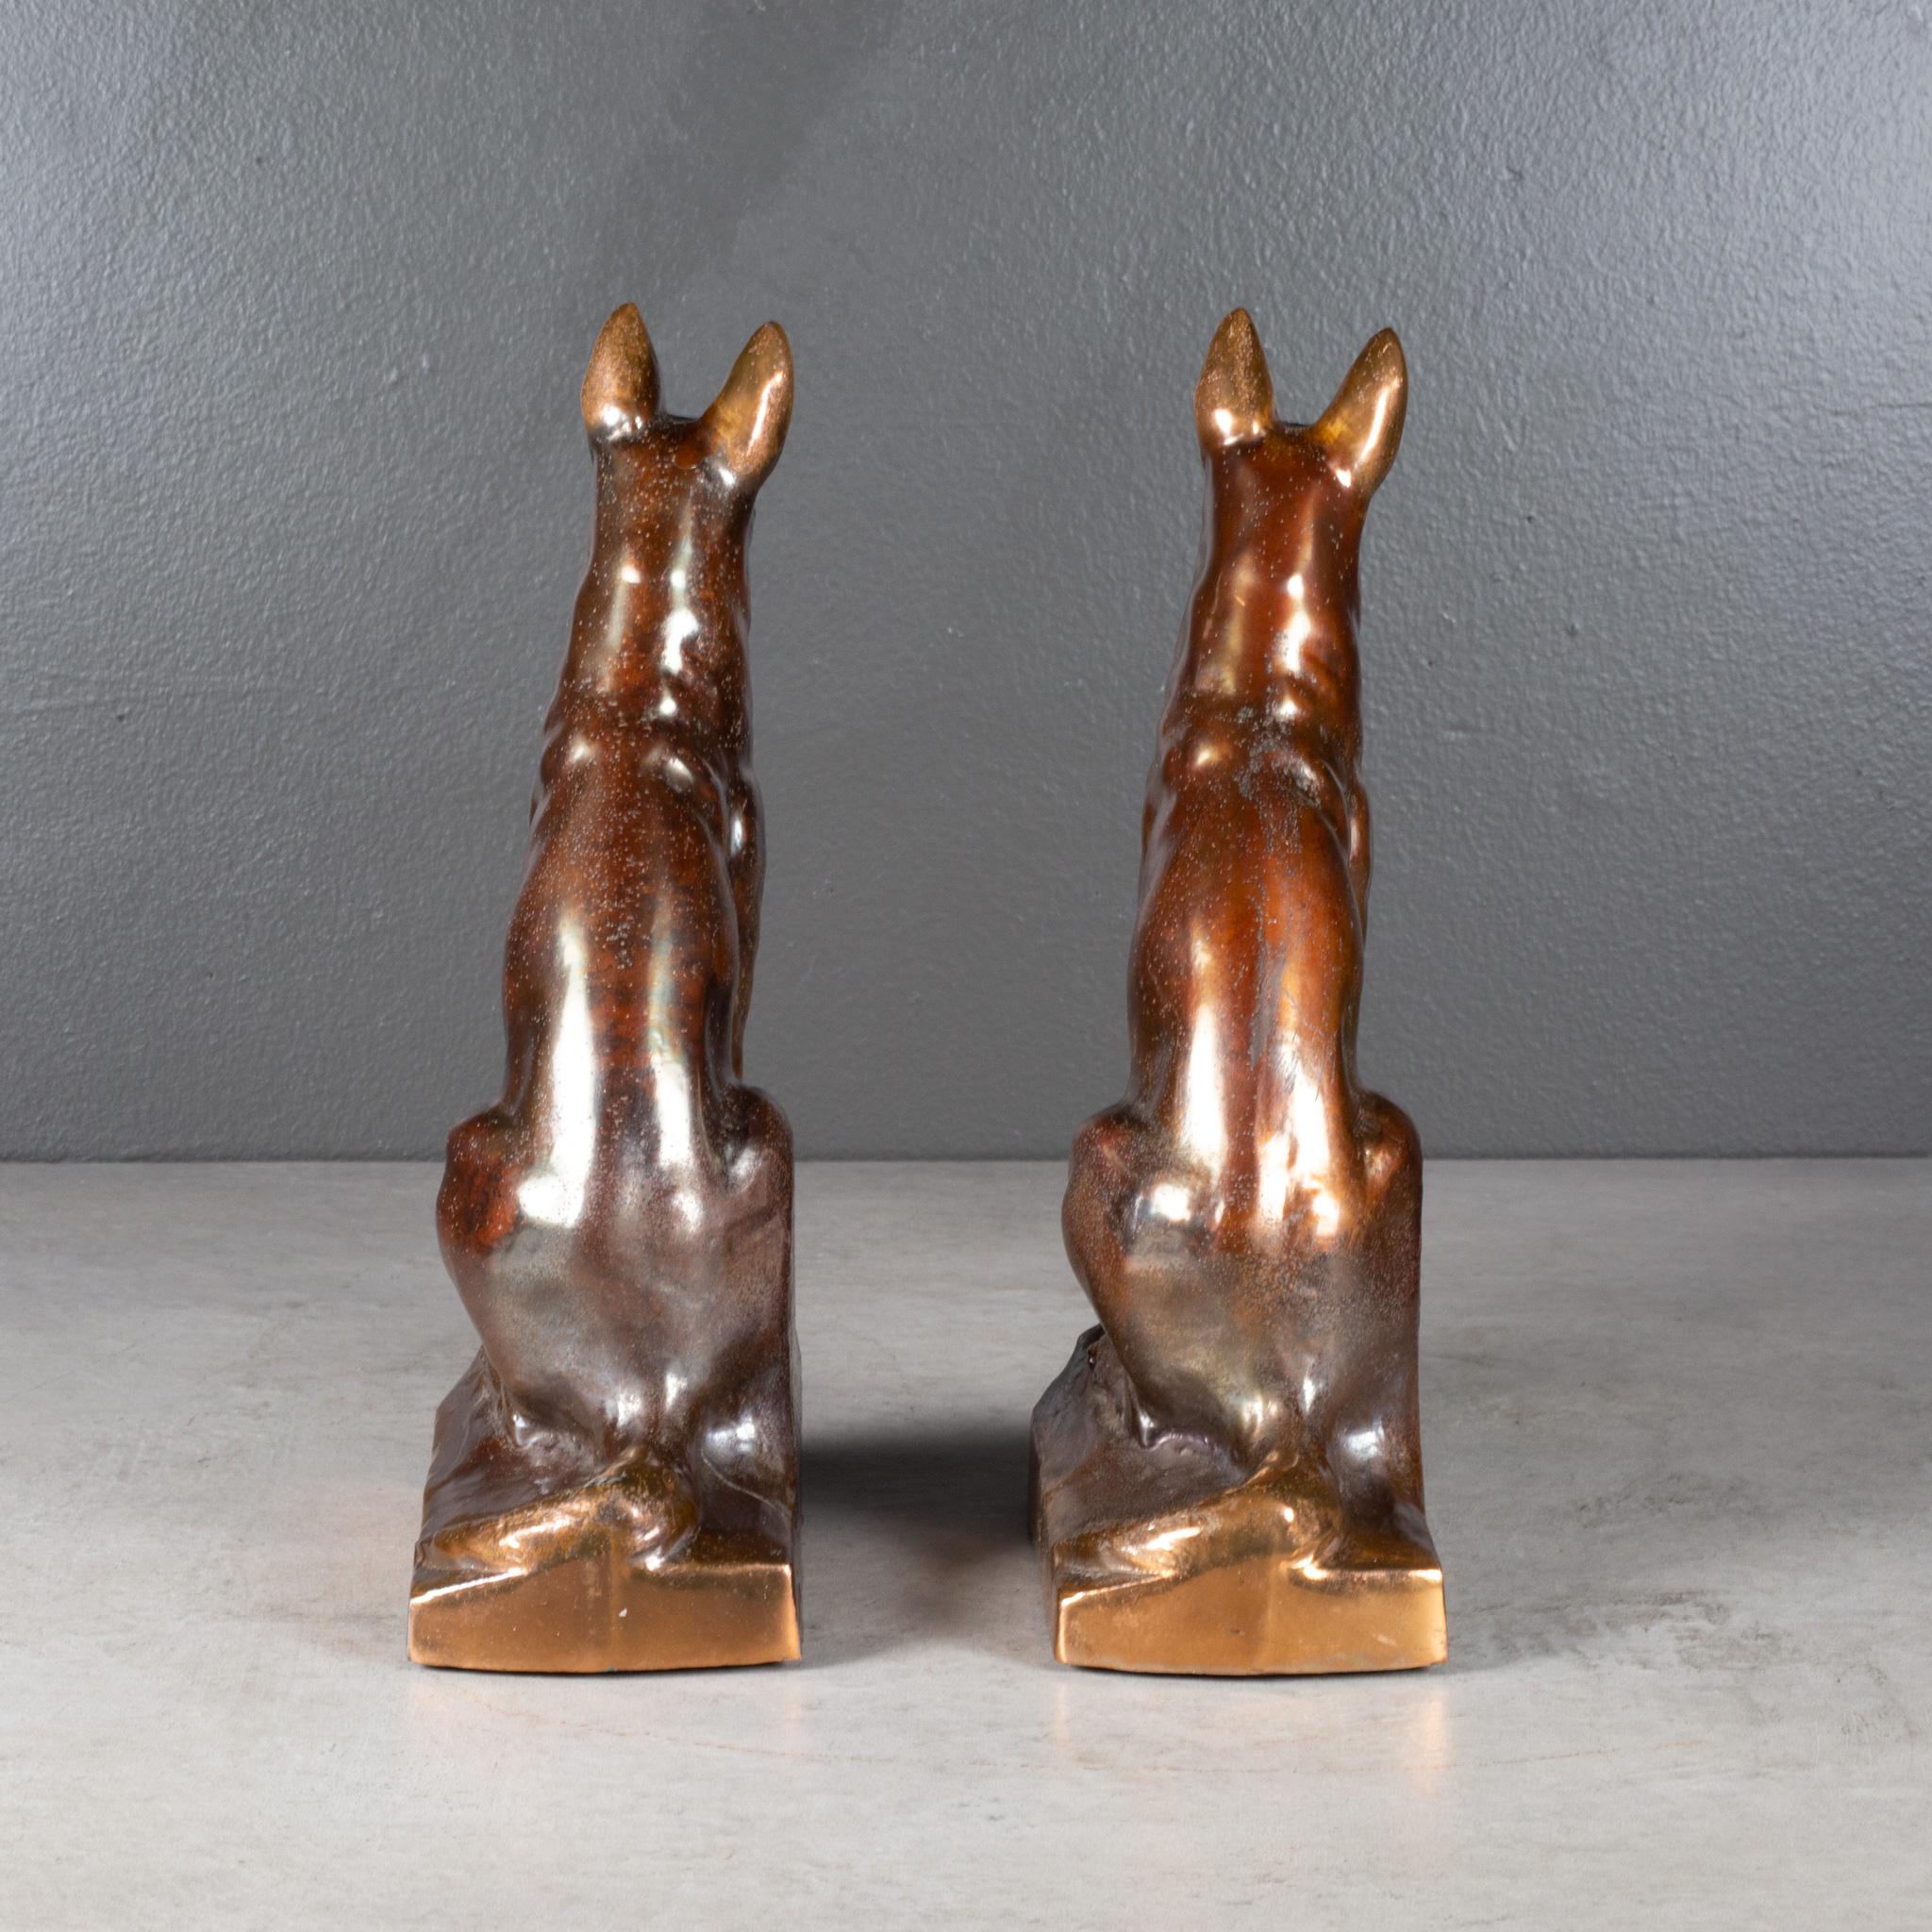 Bronze Plated German Shepherd Bookends c.1950  (FREE SHIPPING) In Good Condition For Sale In San Francisco, CA